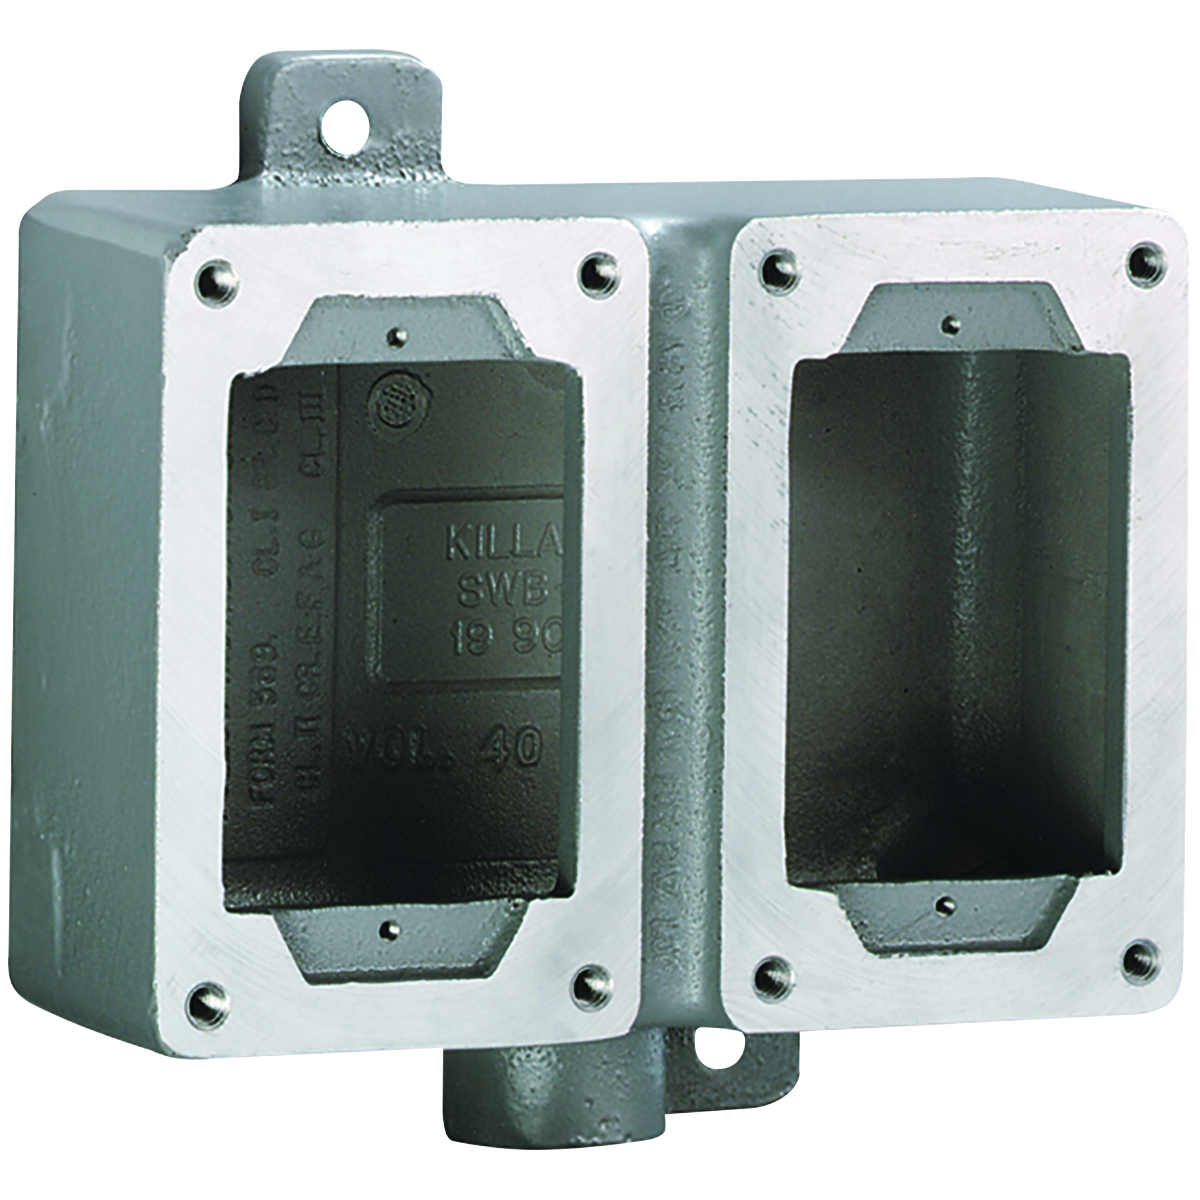 SWB SERIES - ALUMINUM DEAD-END DOUBLE-GANG DEVICE BODY FOR USE WITHXCS/XS/XT COVER ASSEMBLIES - HUB SIZE 1 INCH